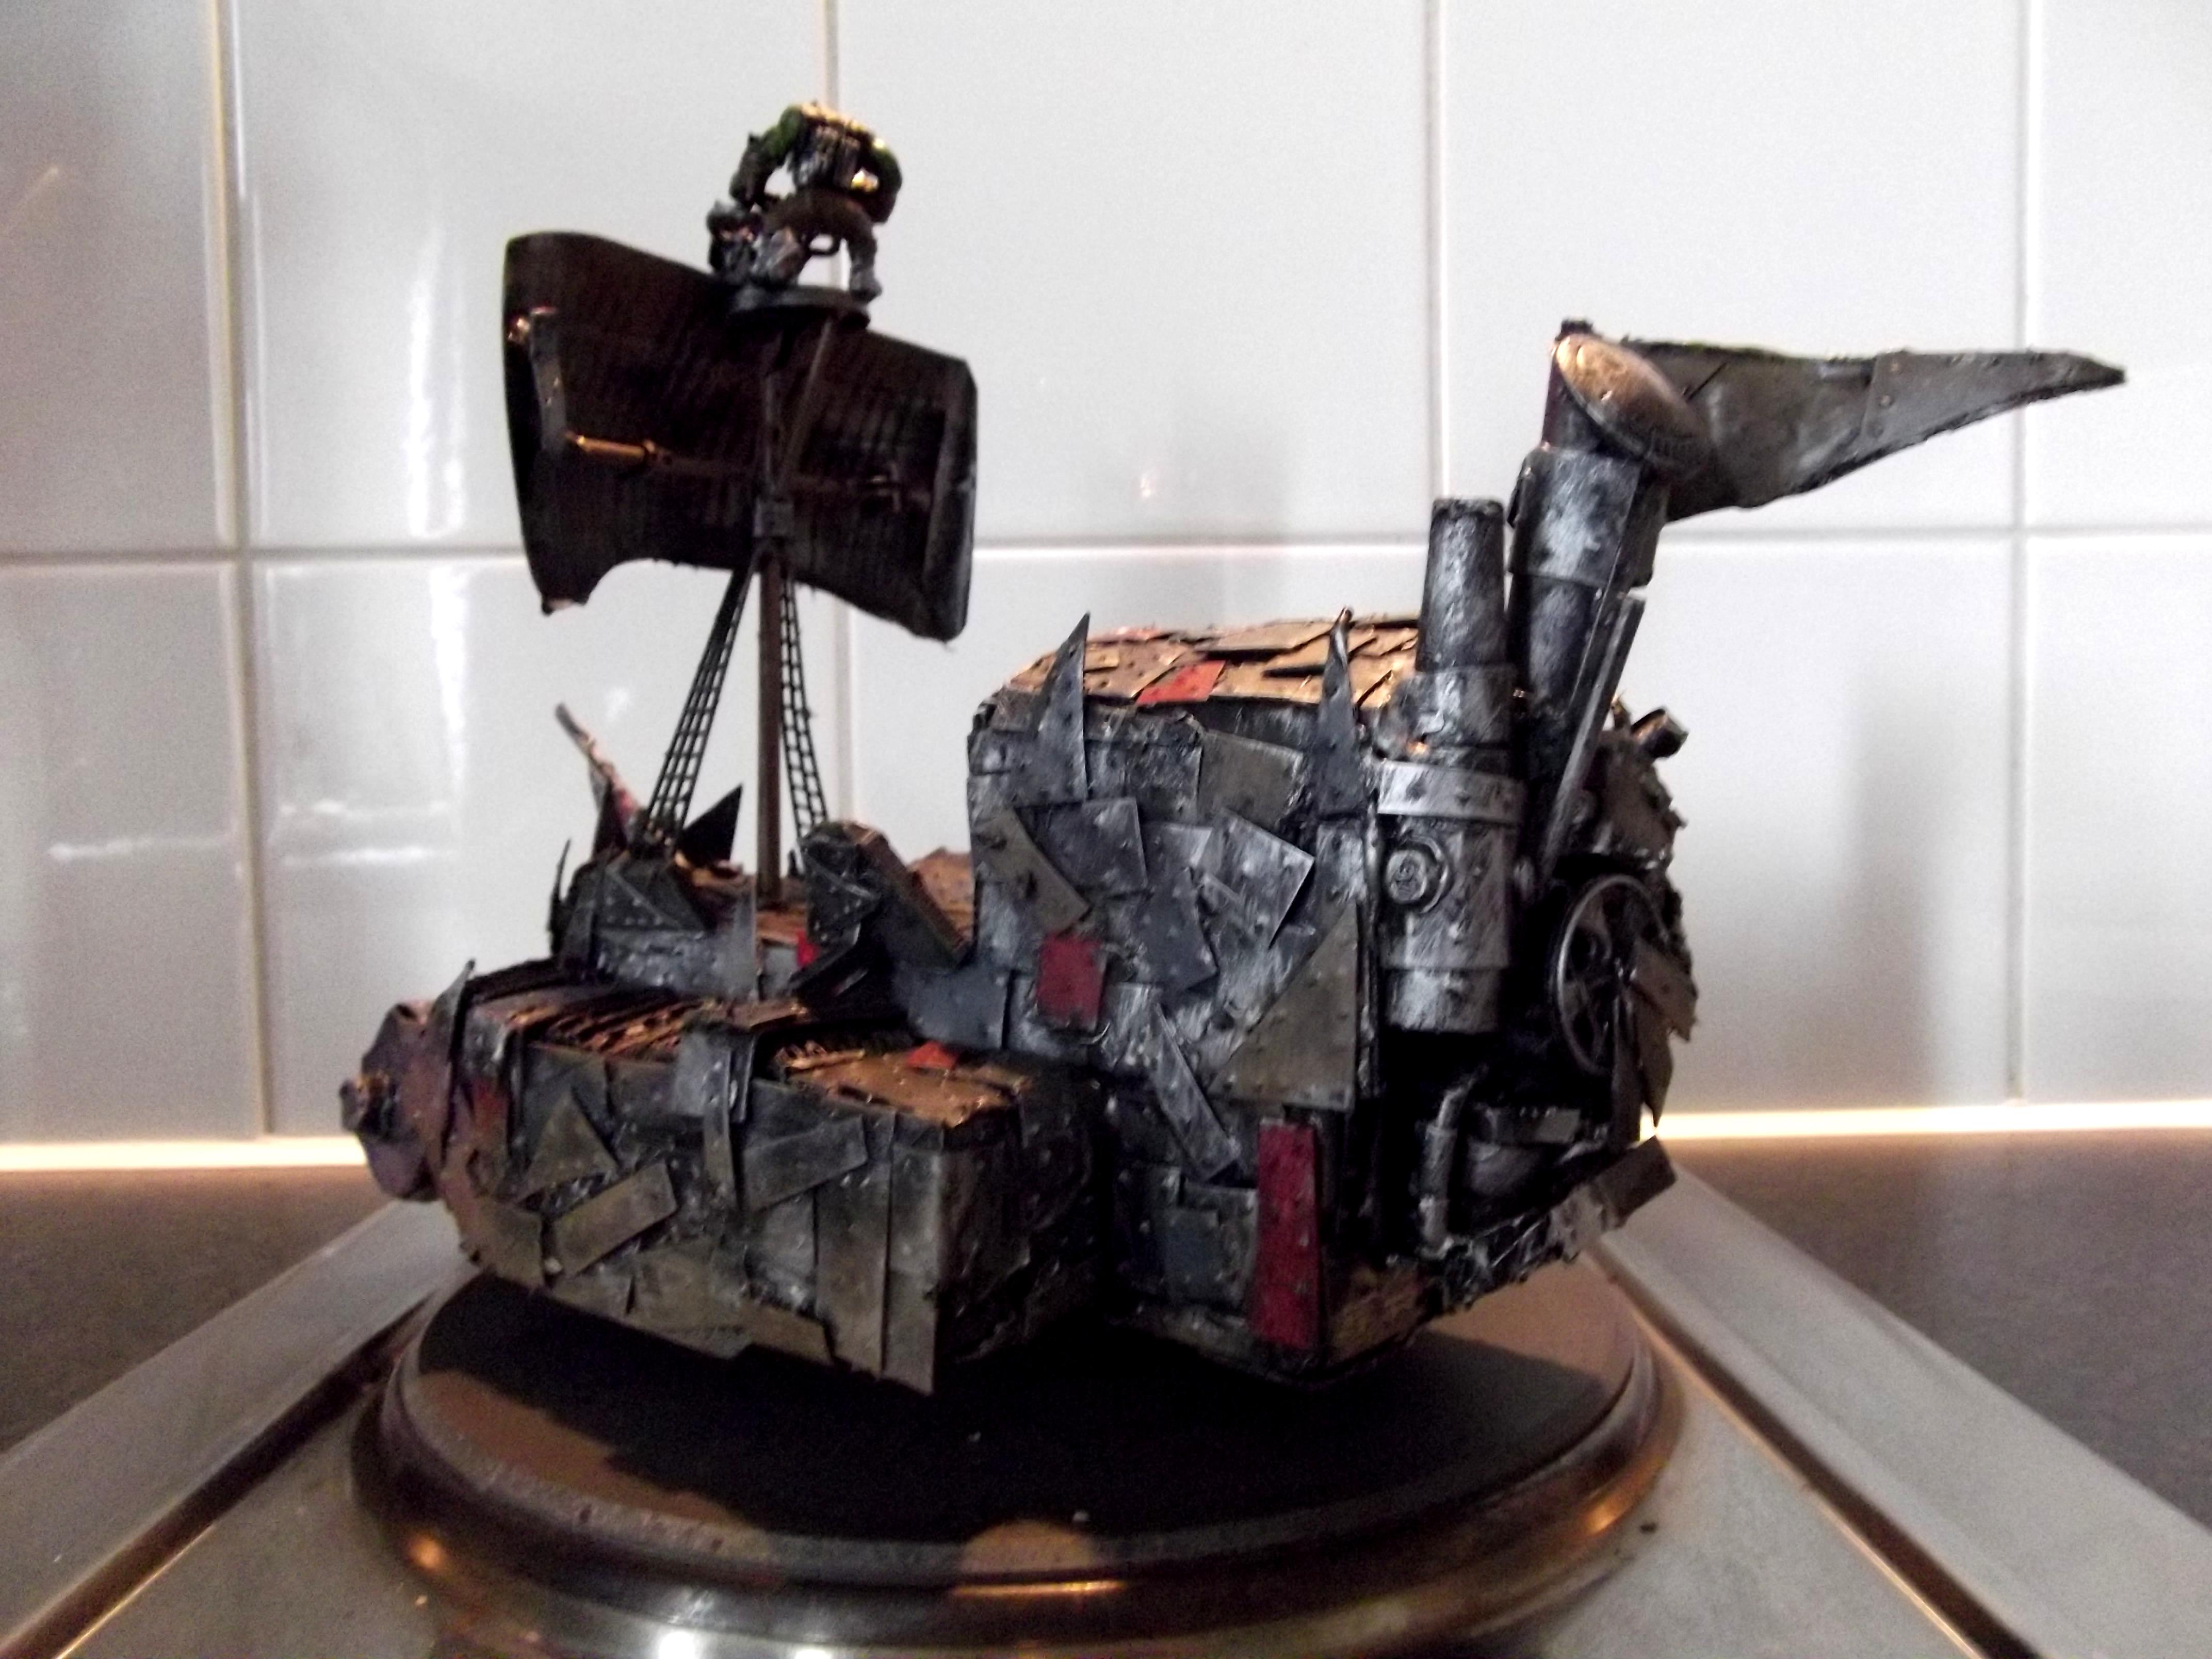 Battlewagon, Conversion, Deffrolla, Freebooter, Looted, Orky, Pirate Freeboota, Scratch Build, Ship